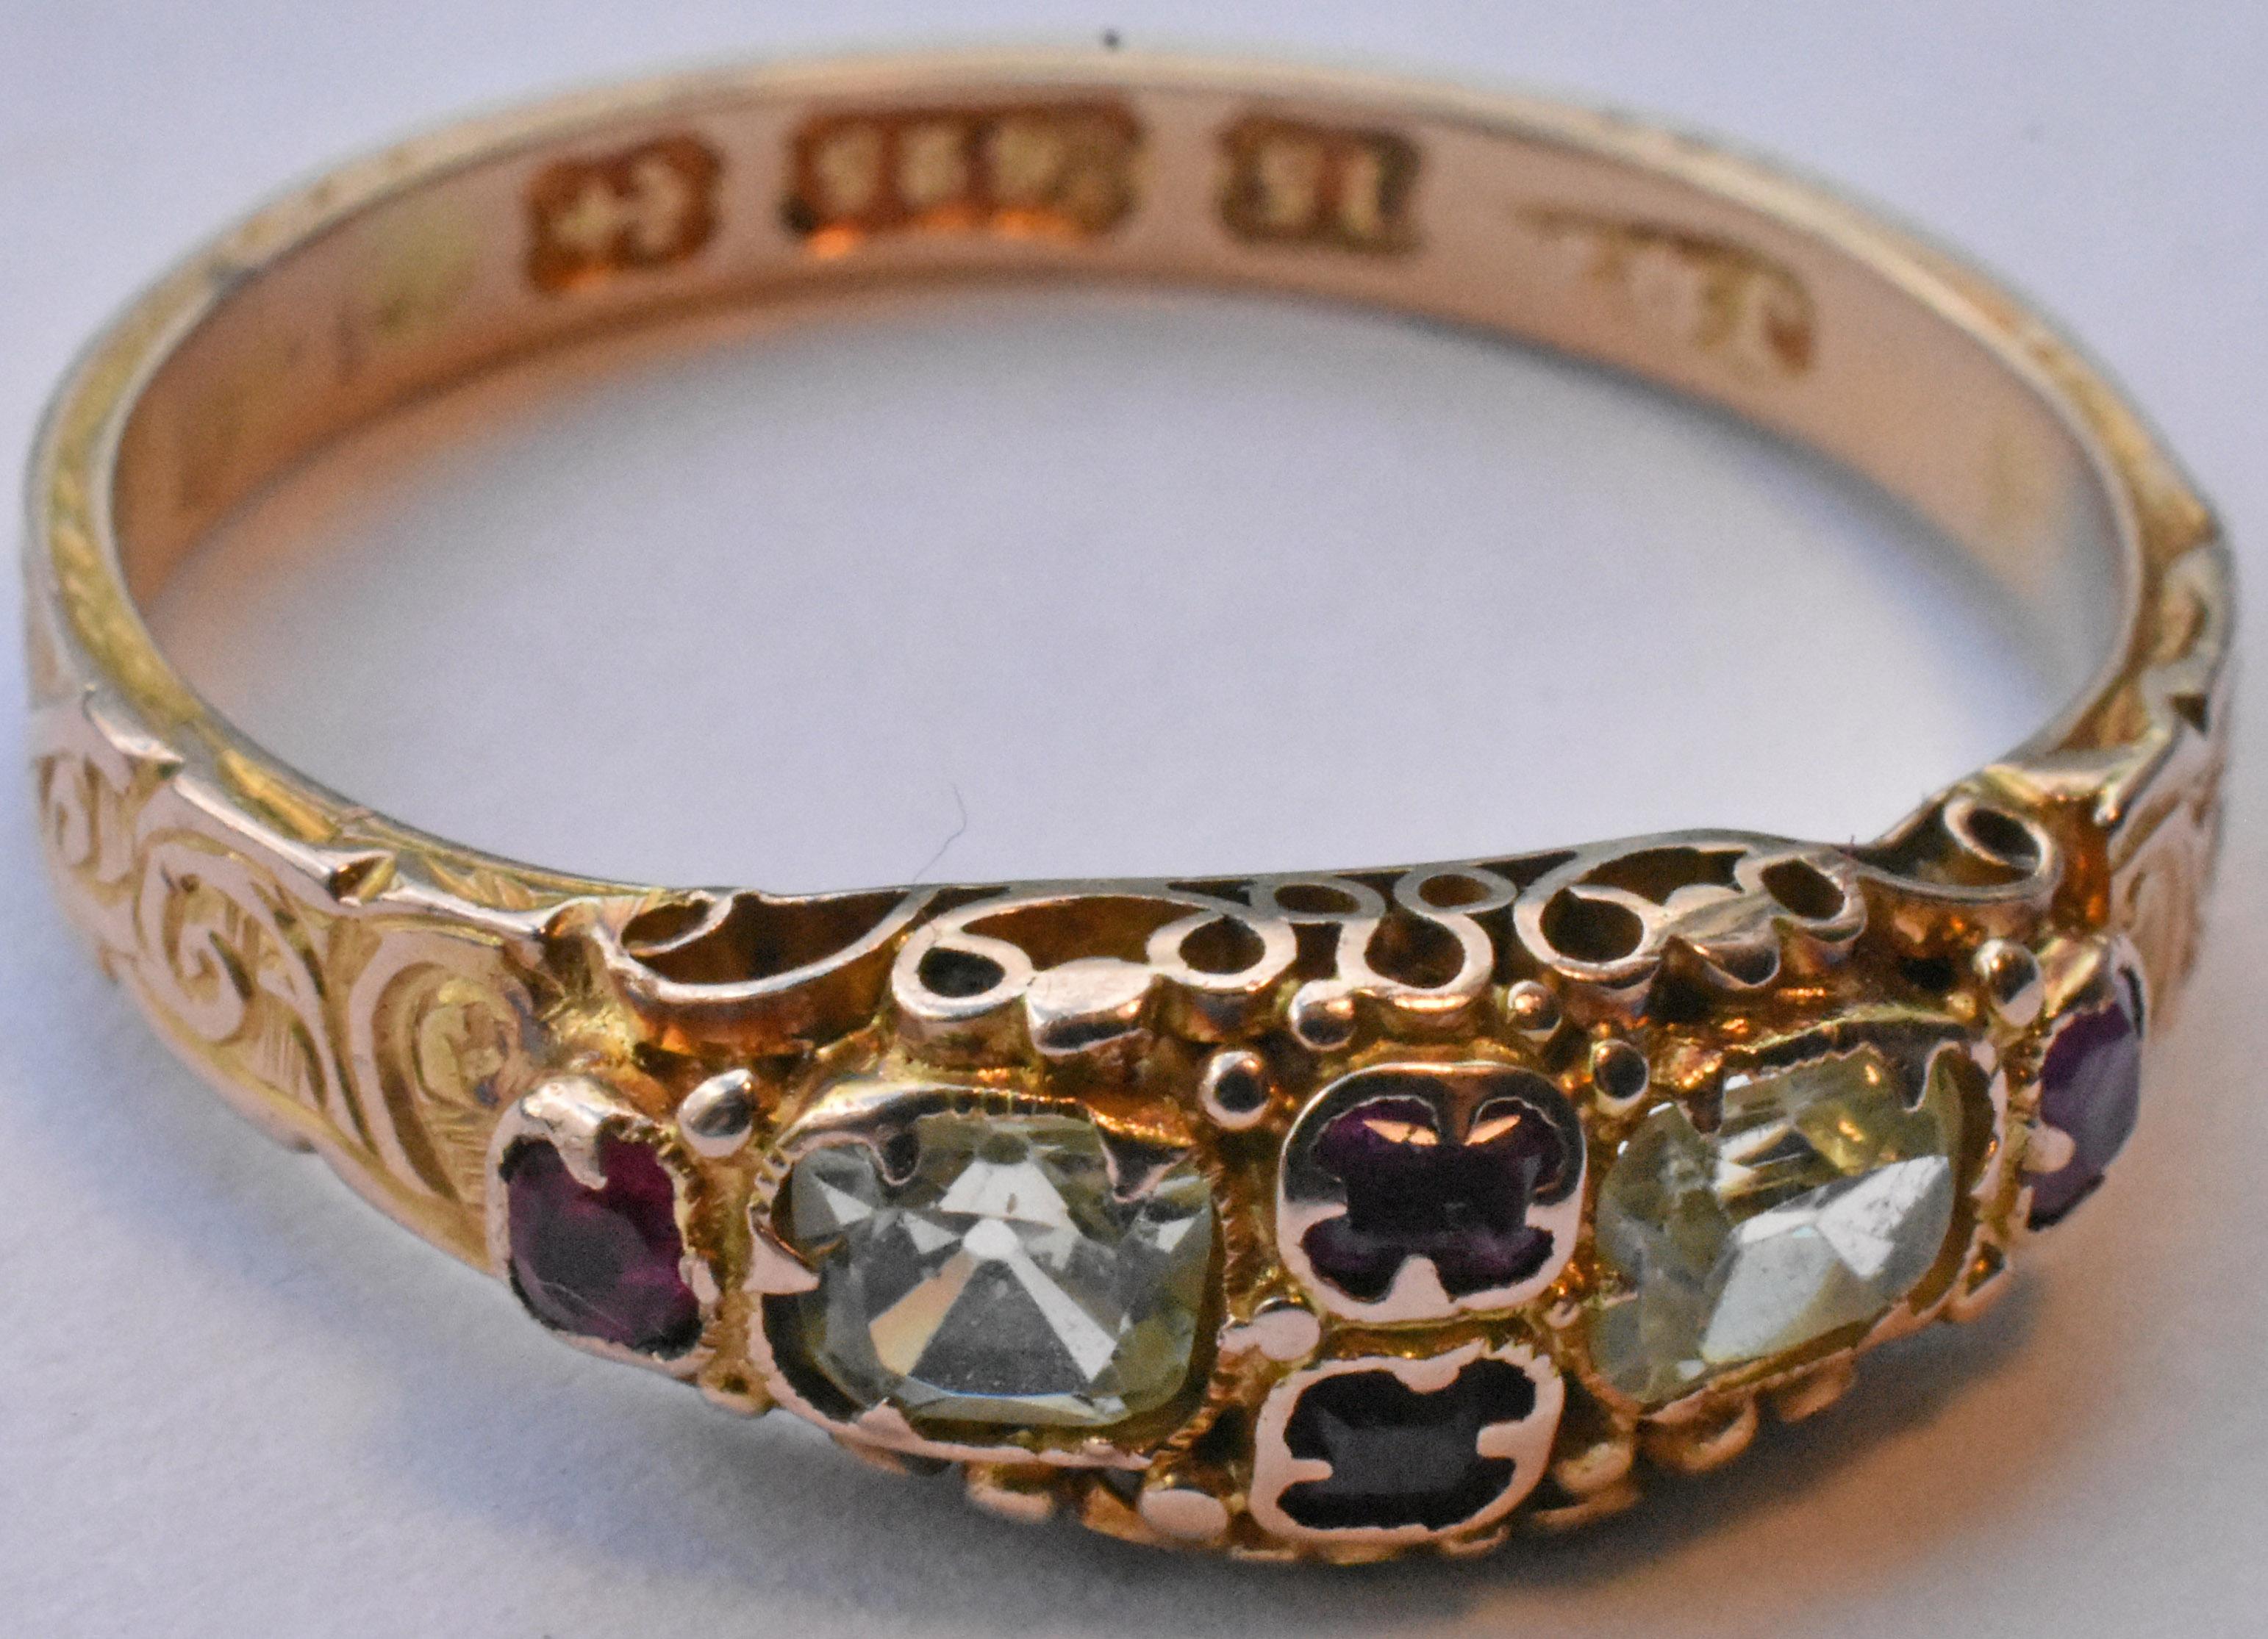 Lovely 15k early Victorian ring with two cushion cut chrysoberyls and four rubies, hallmarked Birmingham and dated 1868. Swirls, whorls and curlicues engraved along the band add interest and texture. Rubies are enclosed in a cloverleaf shaped